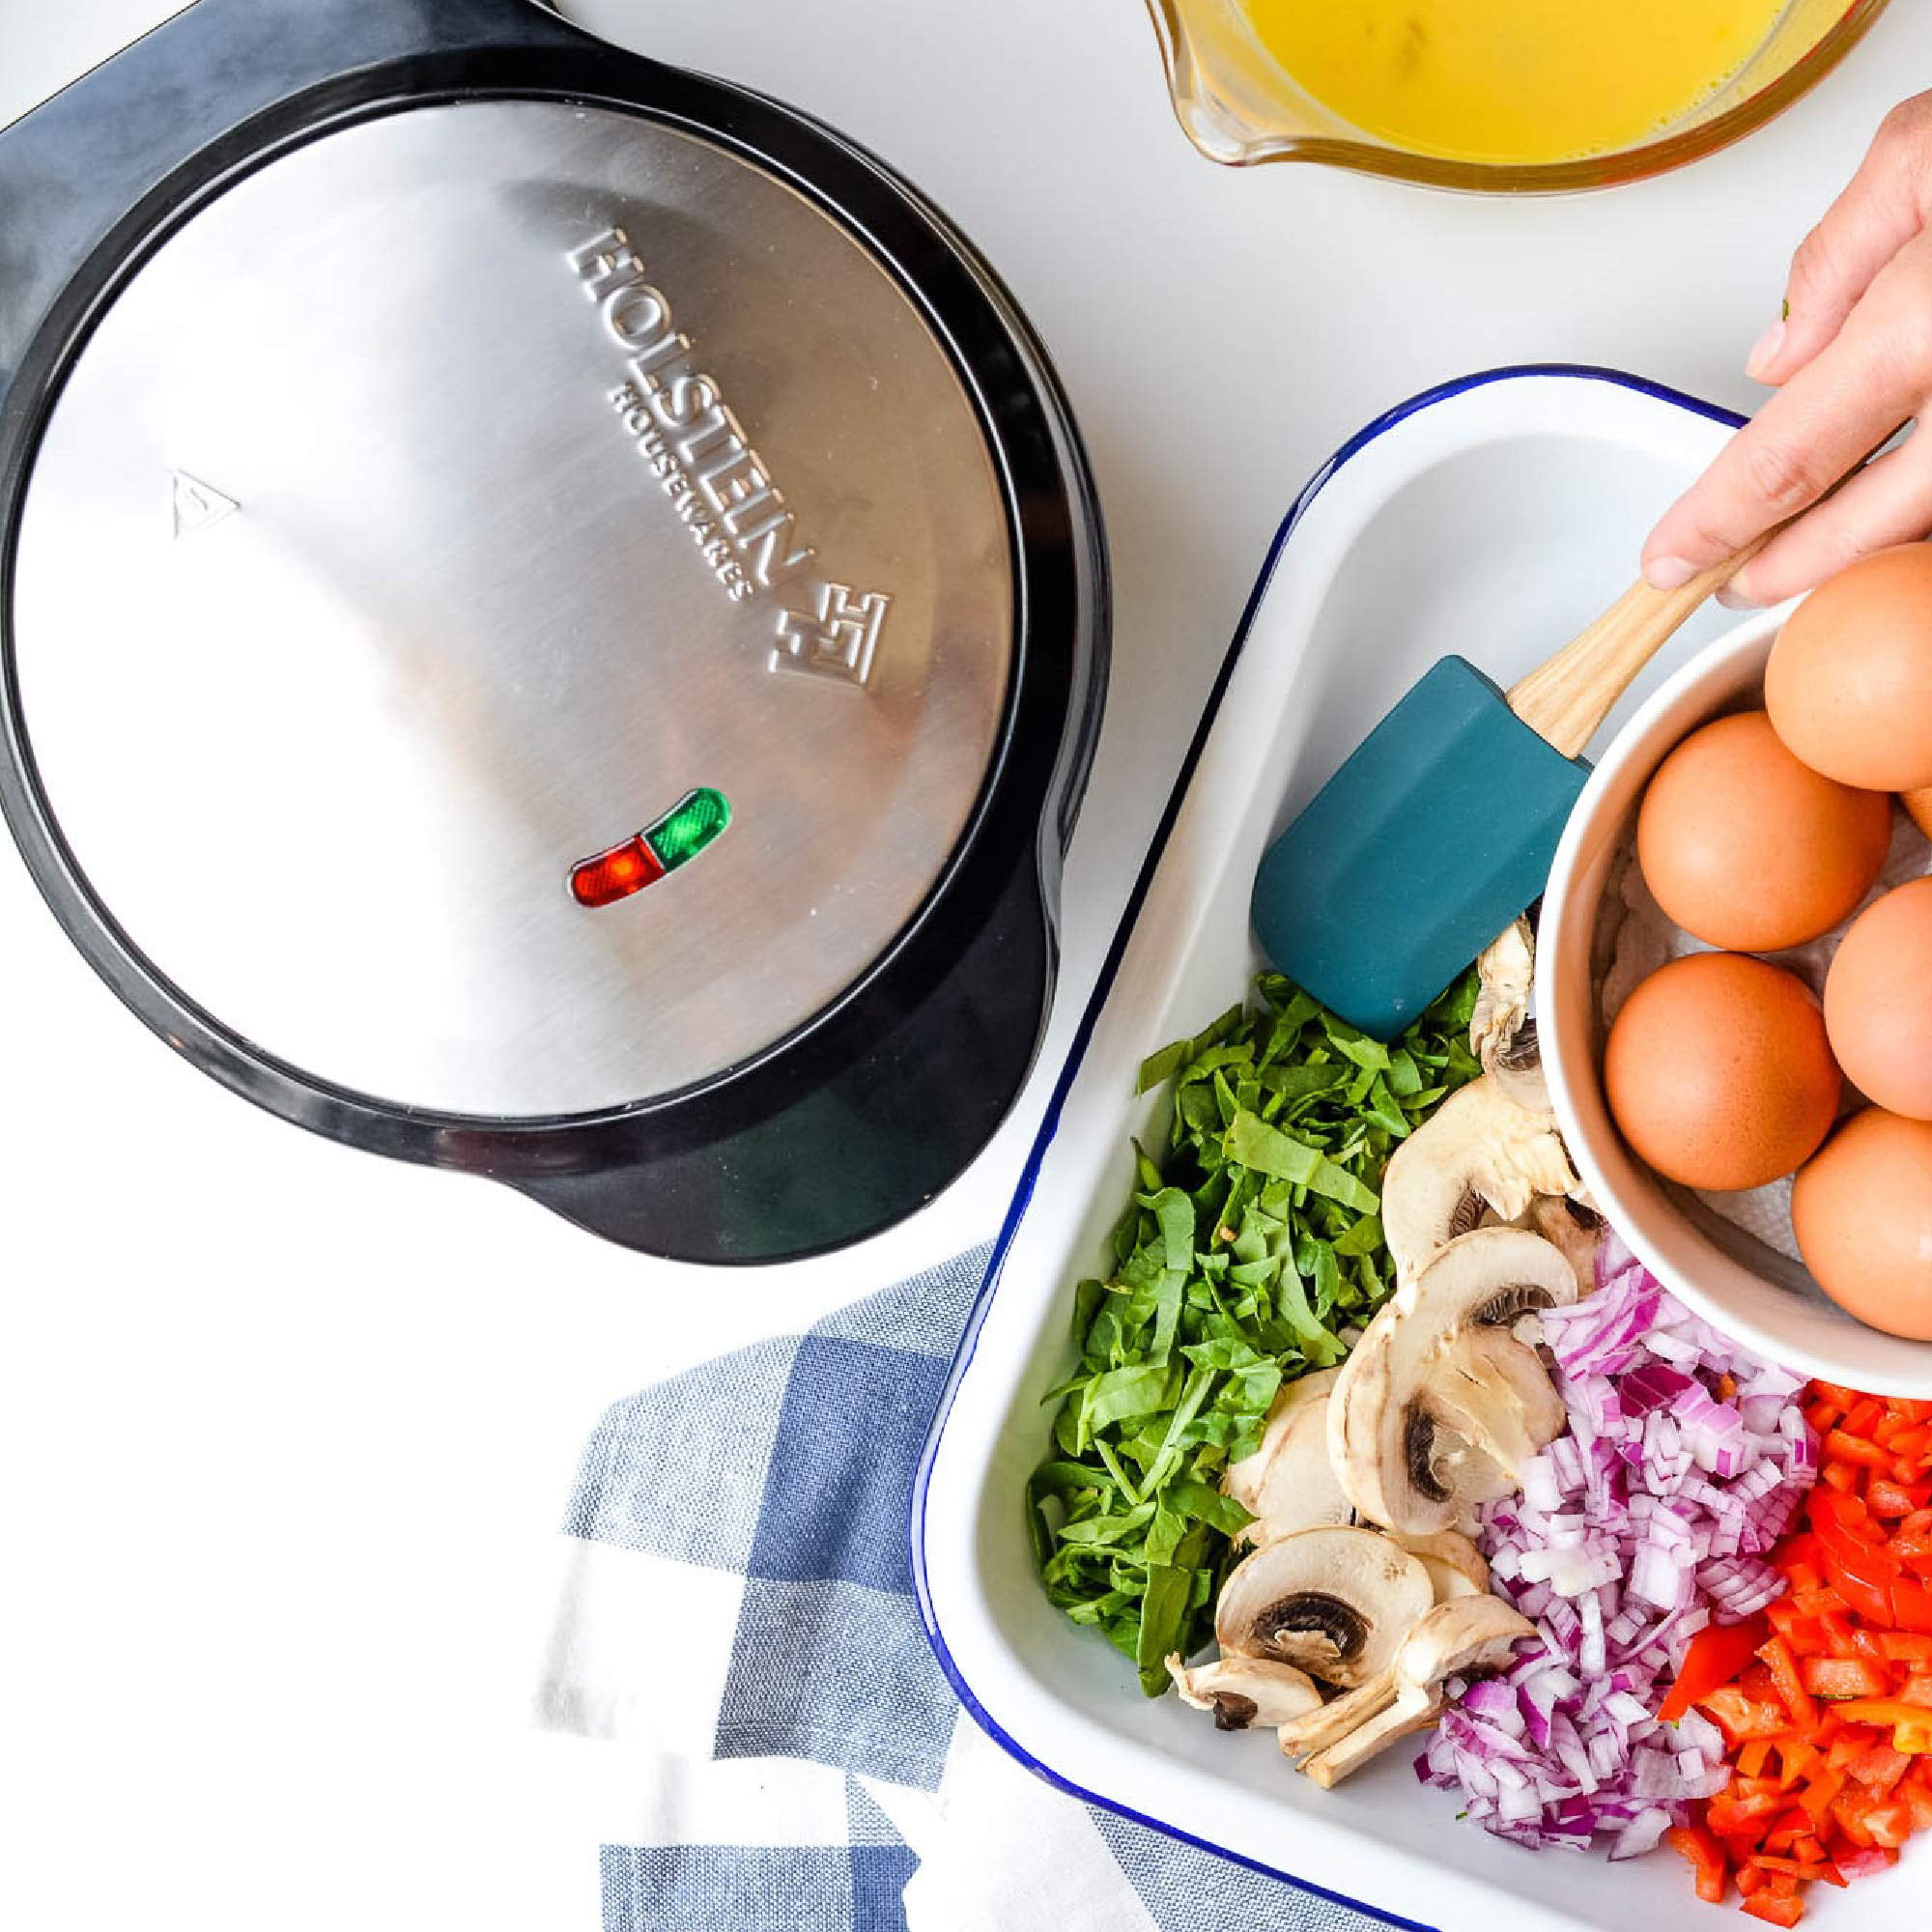 Inexpensive meals await: Holstein Housewares Omelet Maker drops to